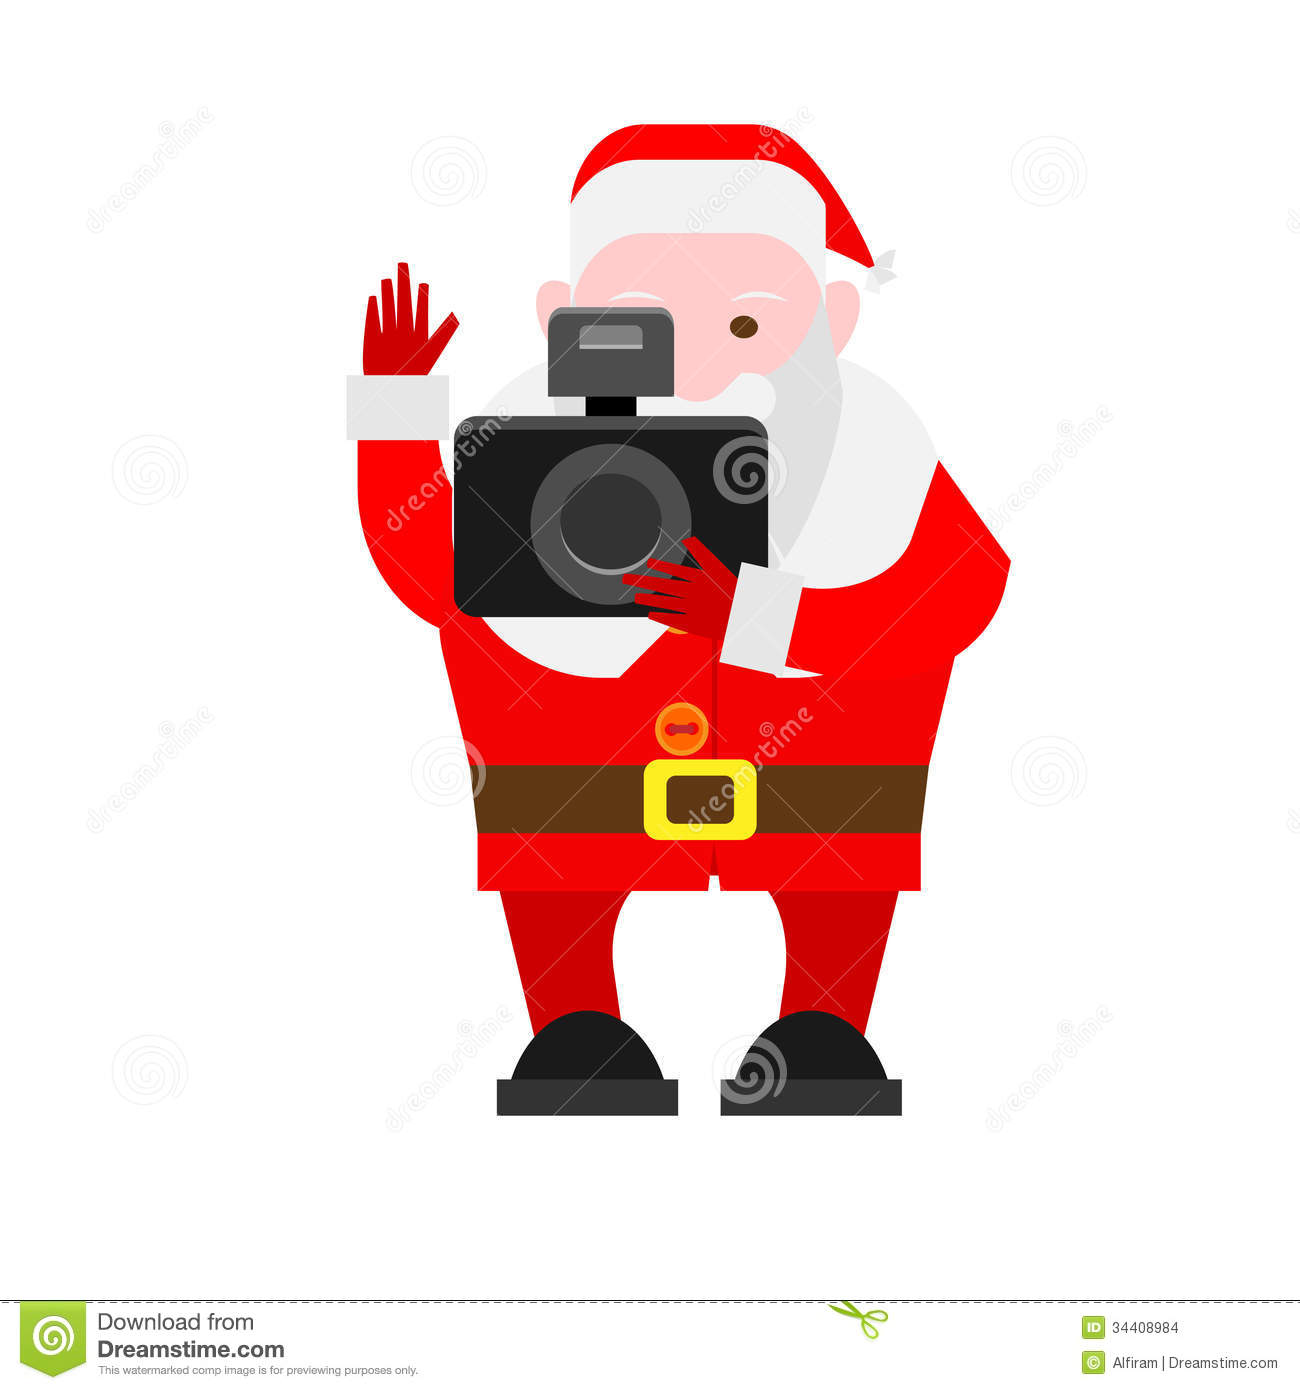 Santa Claus Hold The Camera Stock Images   Image  34408984